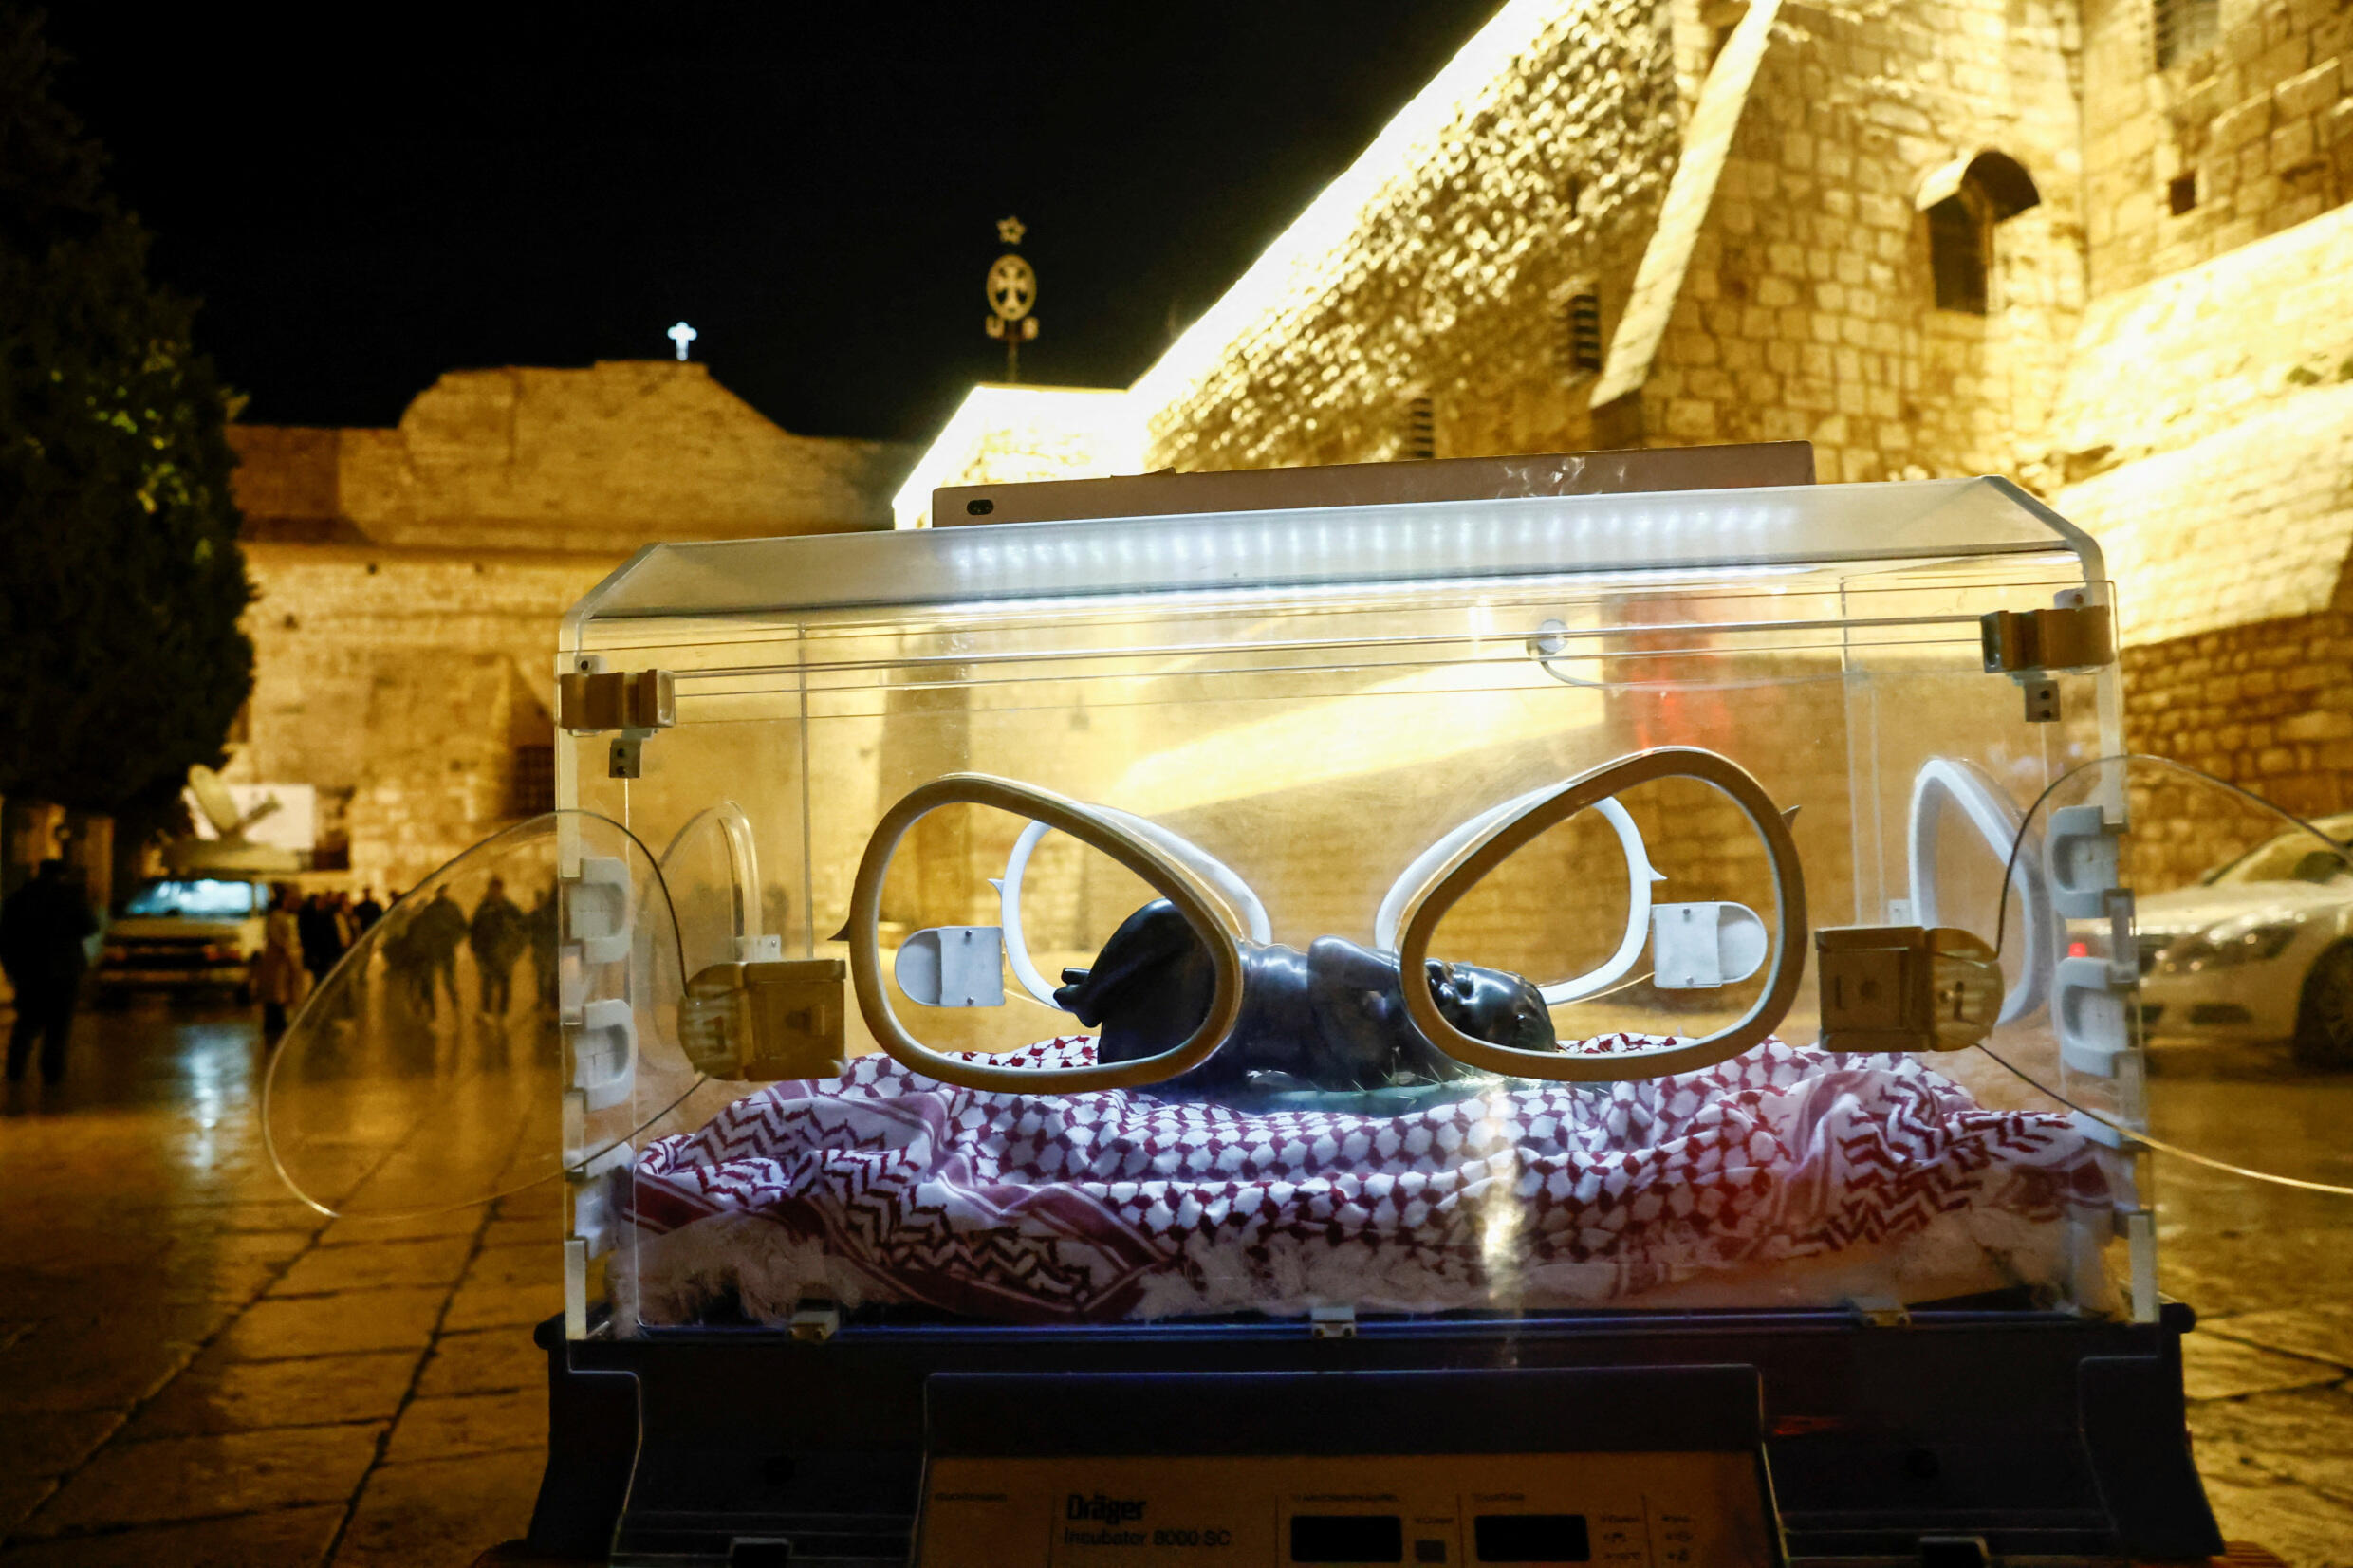 A depiction of Jesus in an incubator was installed in front of the Church of the Nativity in Bethlehem on December 24.